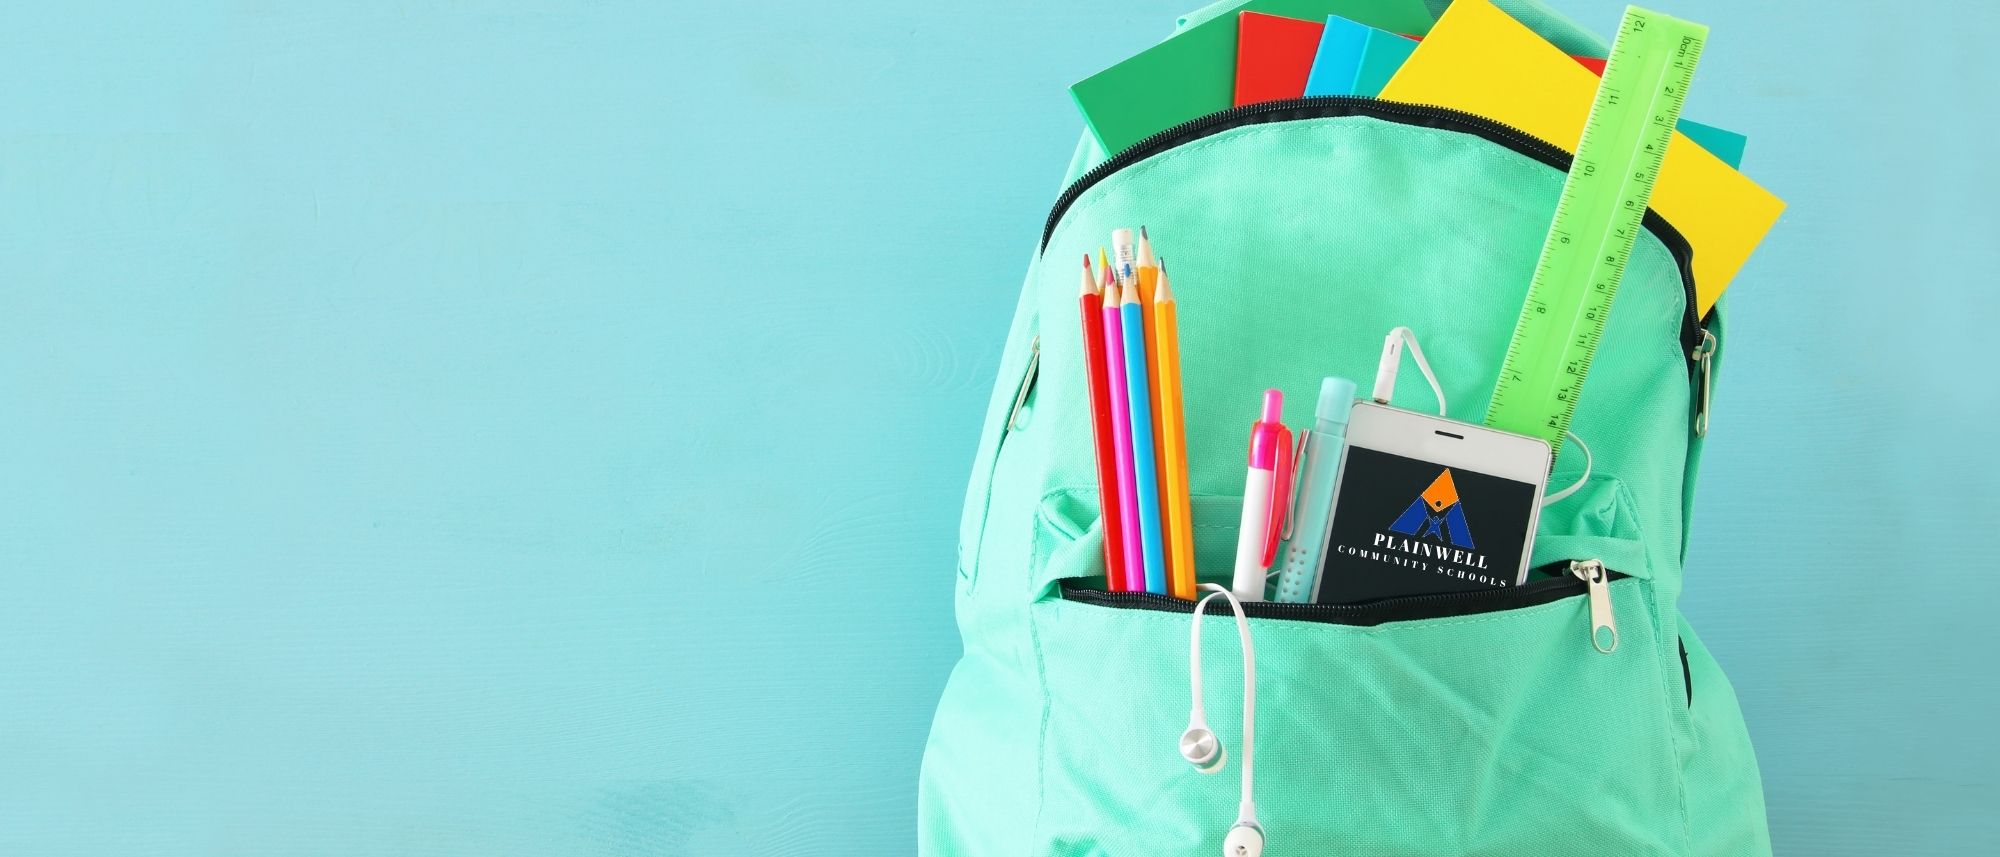 Picture of backpack with various school supplies (notebooks, pencils, cell phone with PCS logo, headphones)